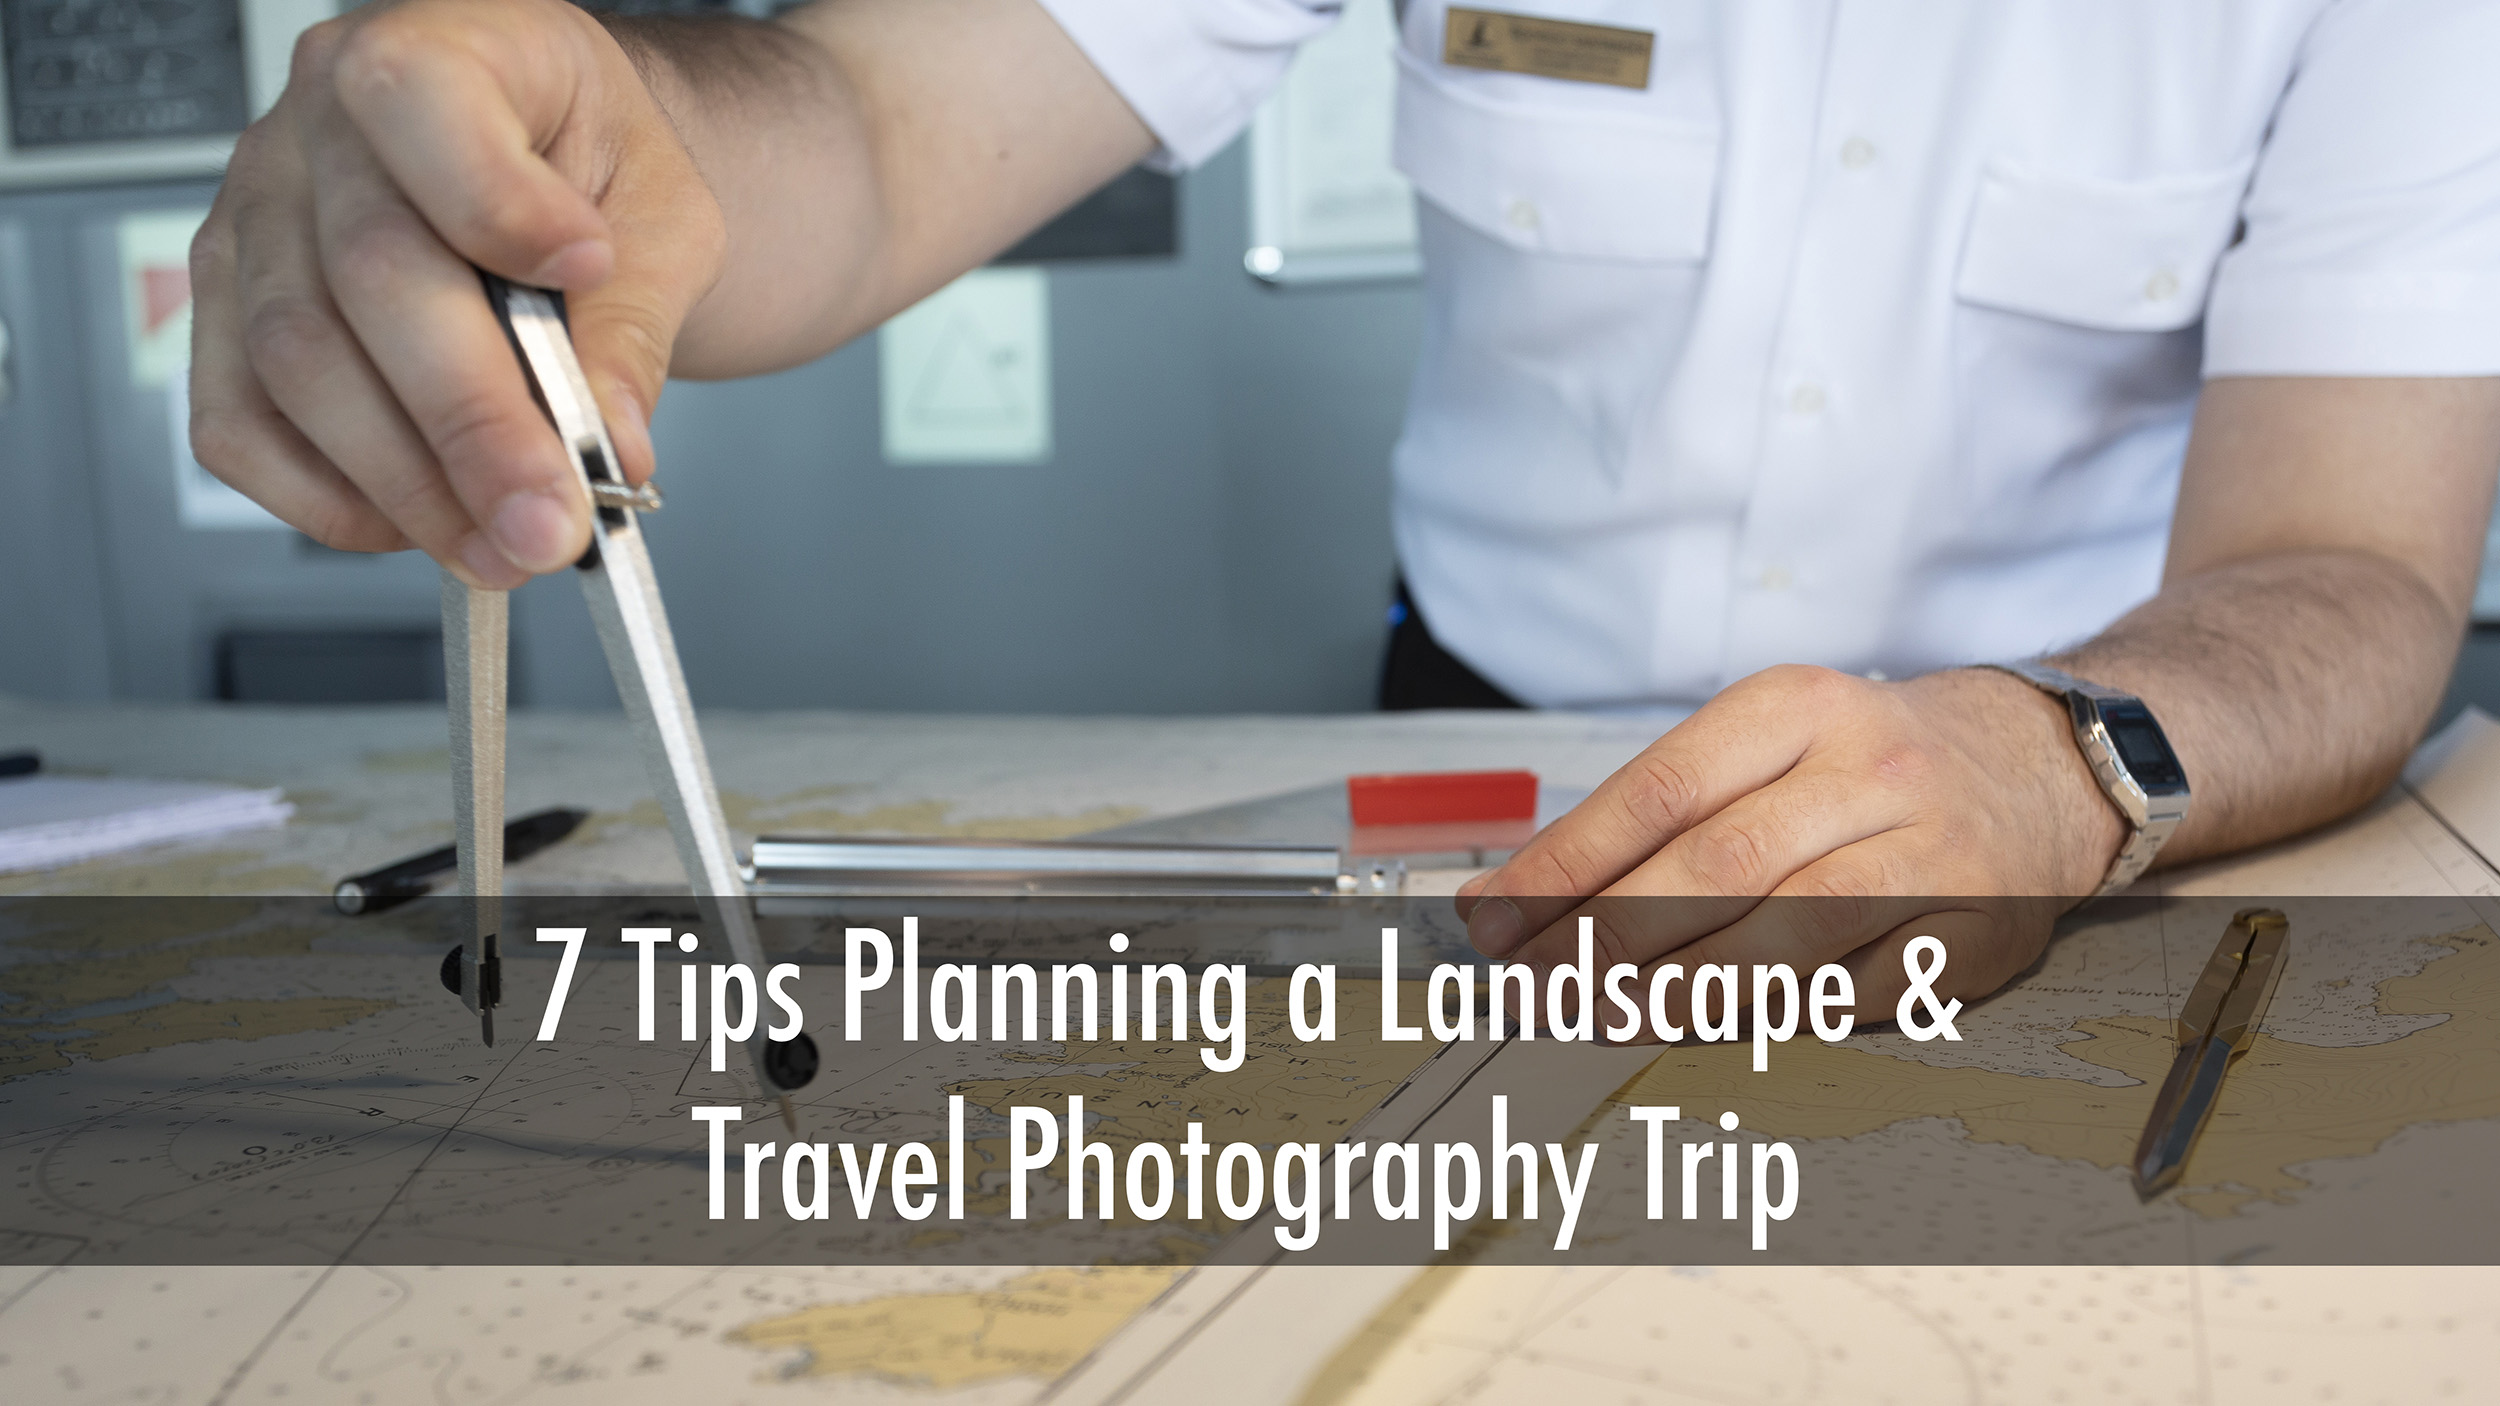 7 tips to plan a landscape and travel photography trip